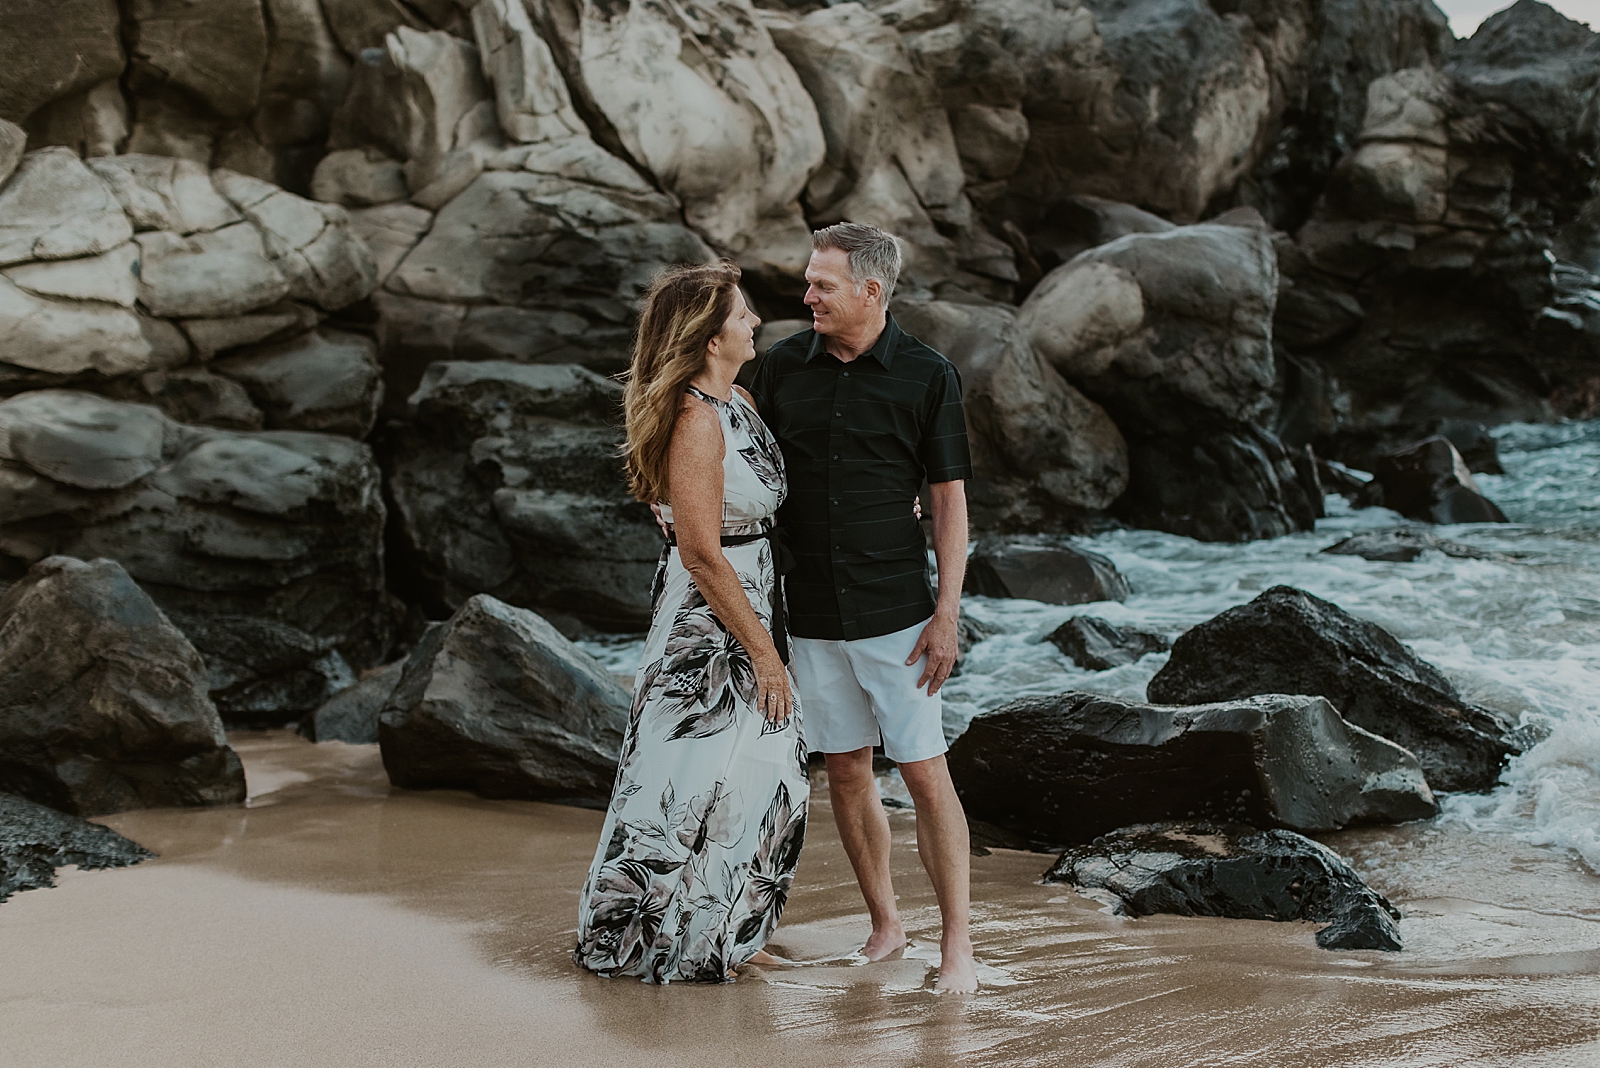 Old couple standing by rocky cliffside on the sand and looking at each other